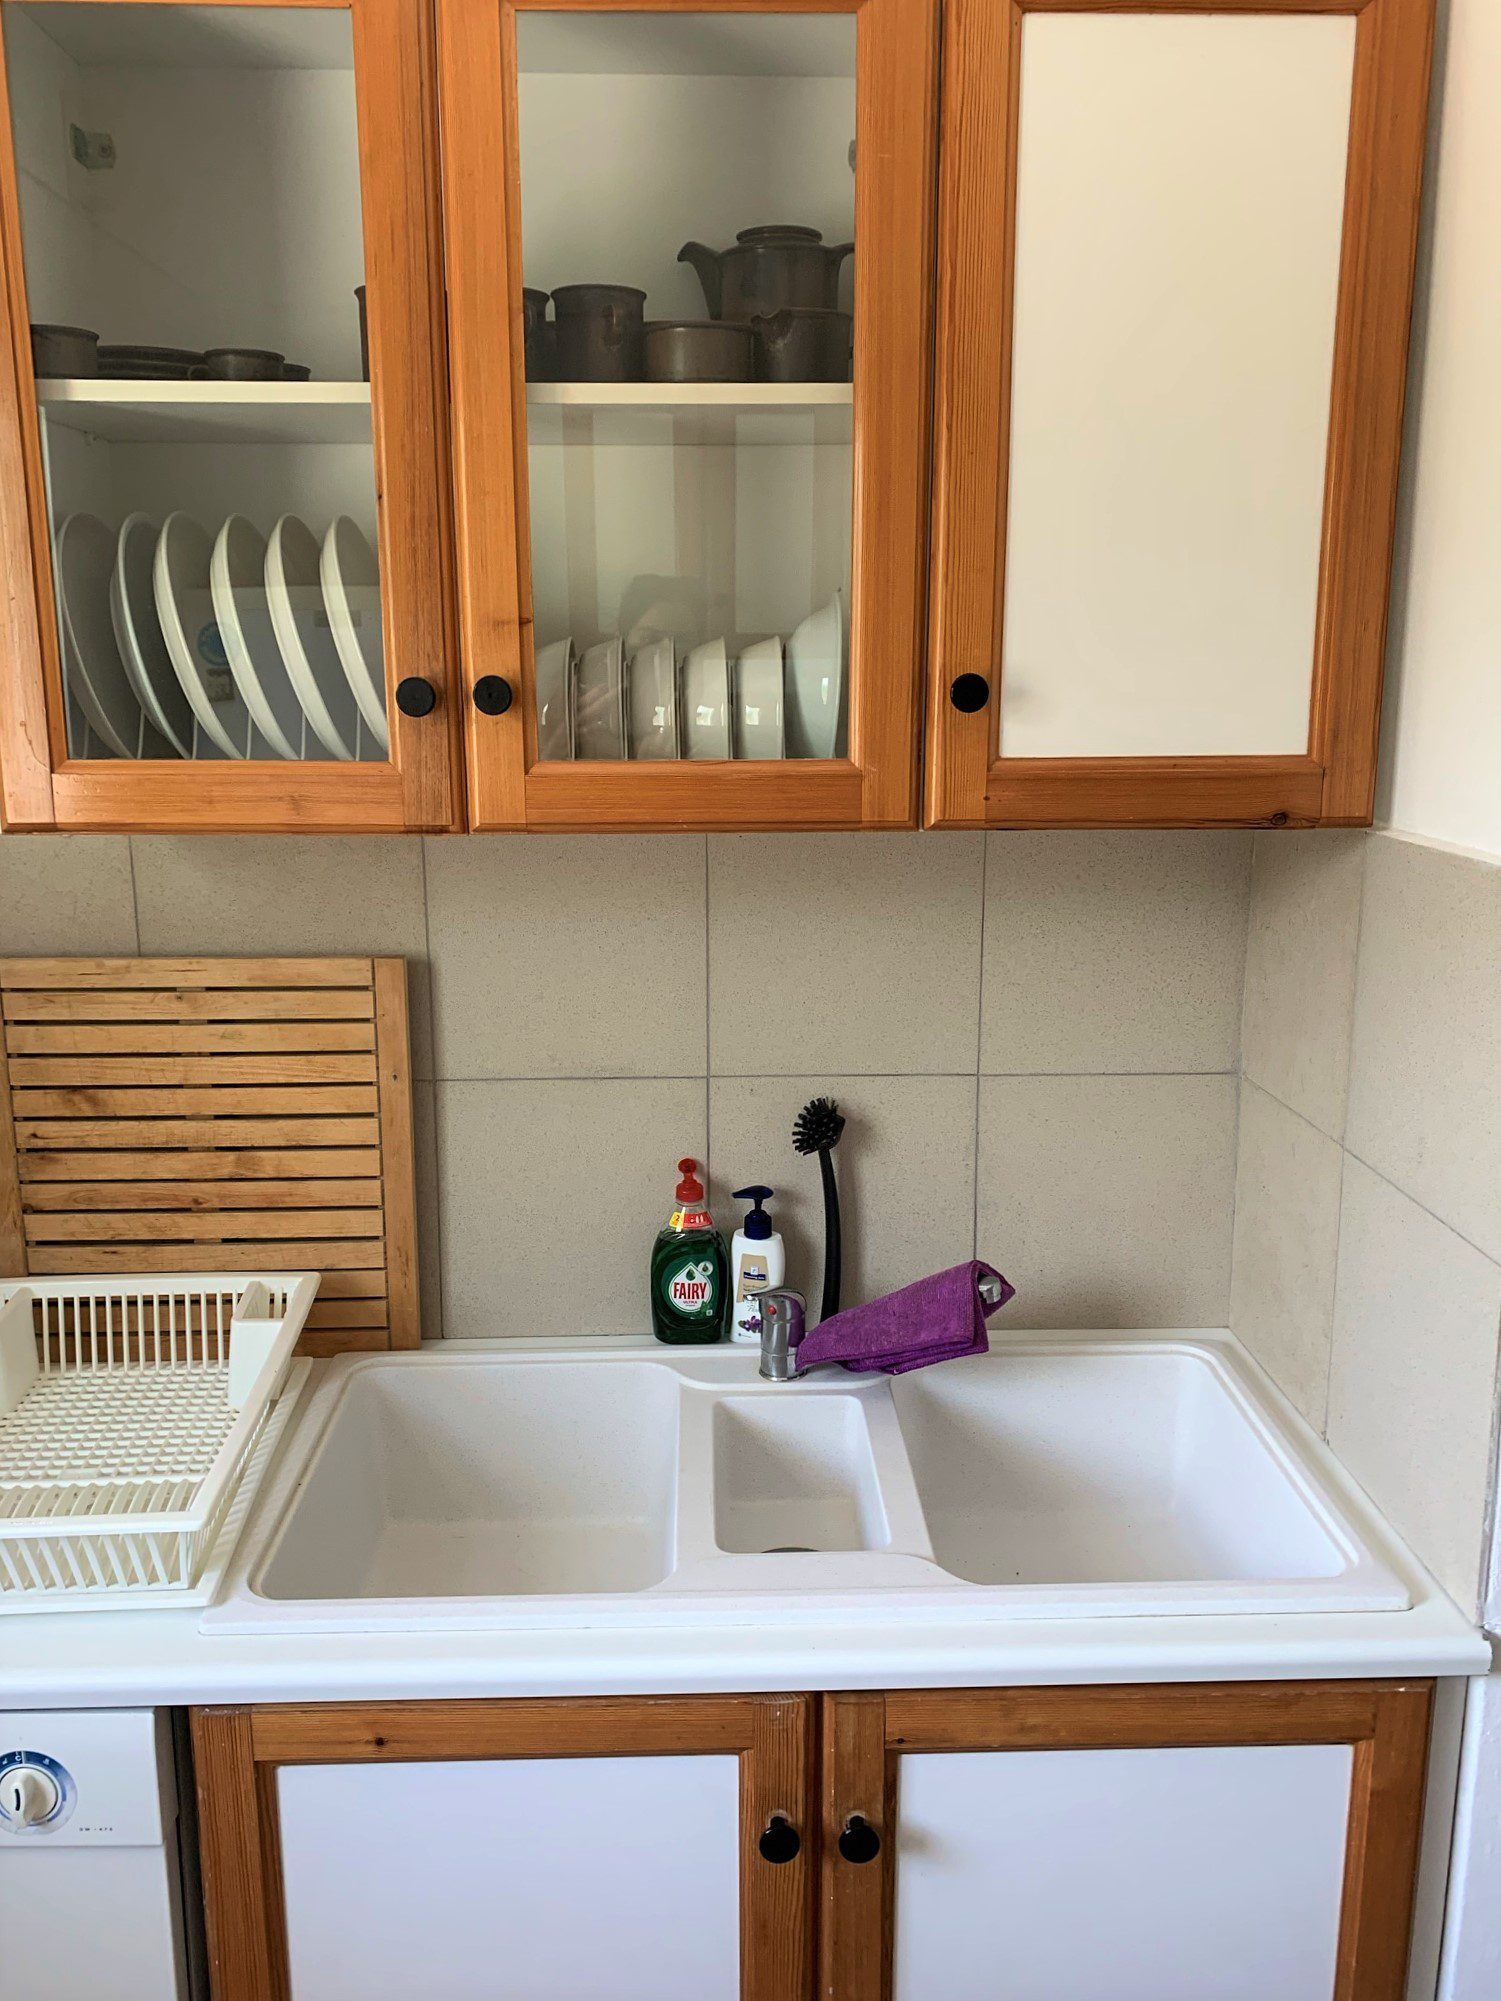 Kitchen of house for rent in Ithaca Greece Stavros